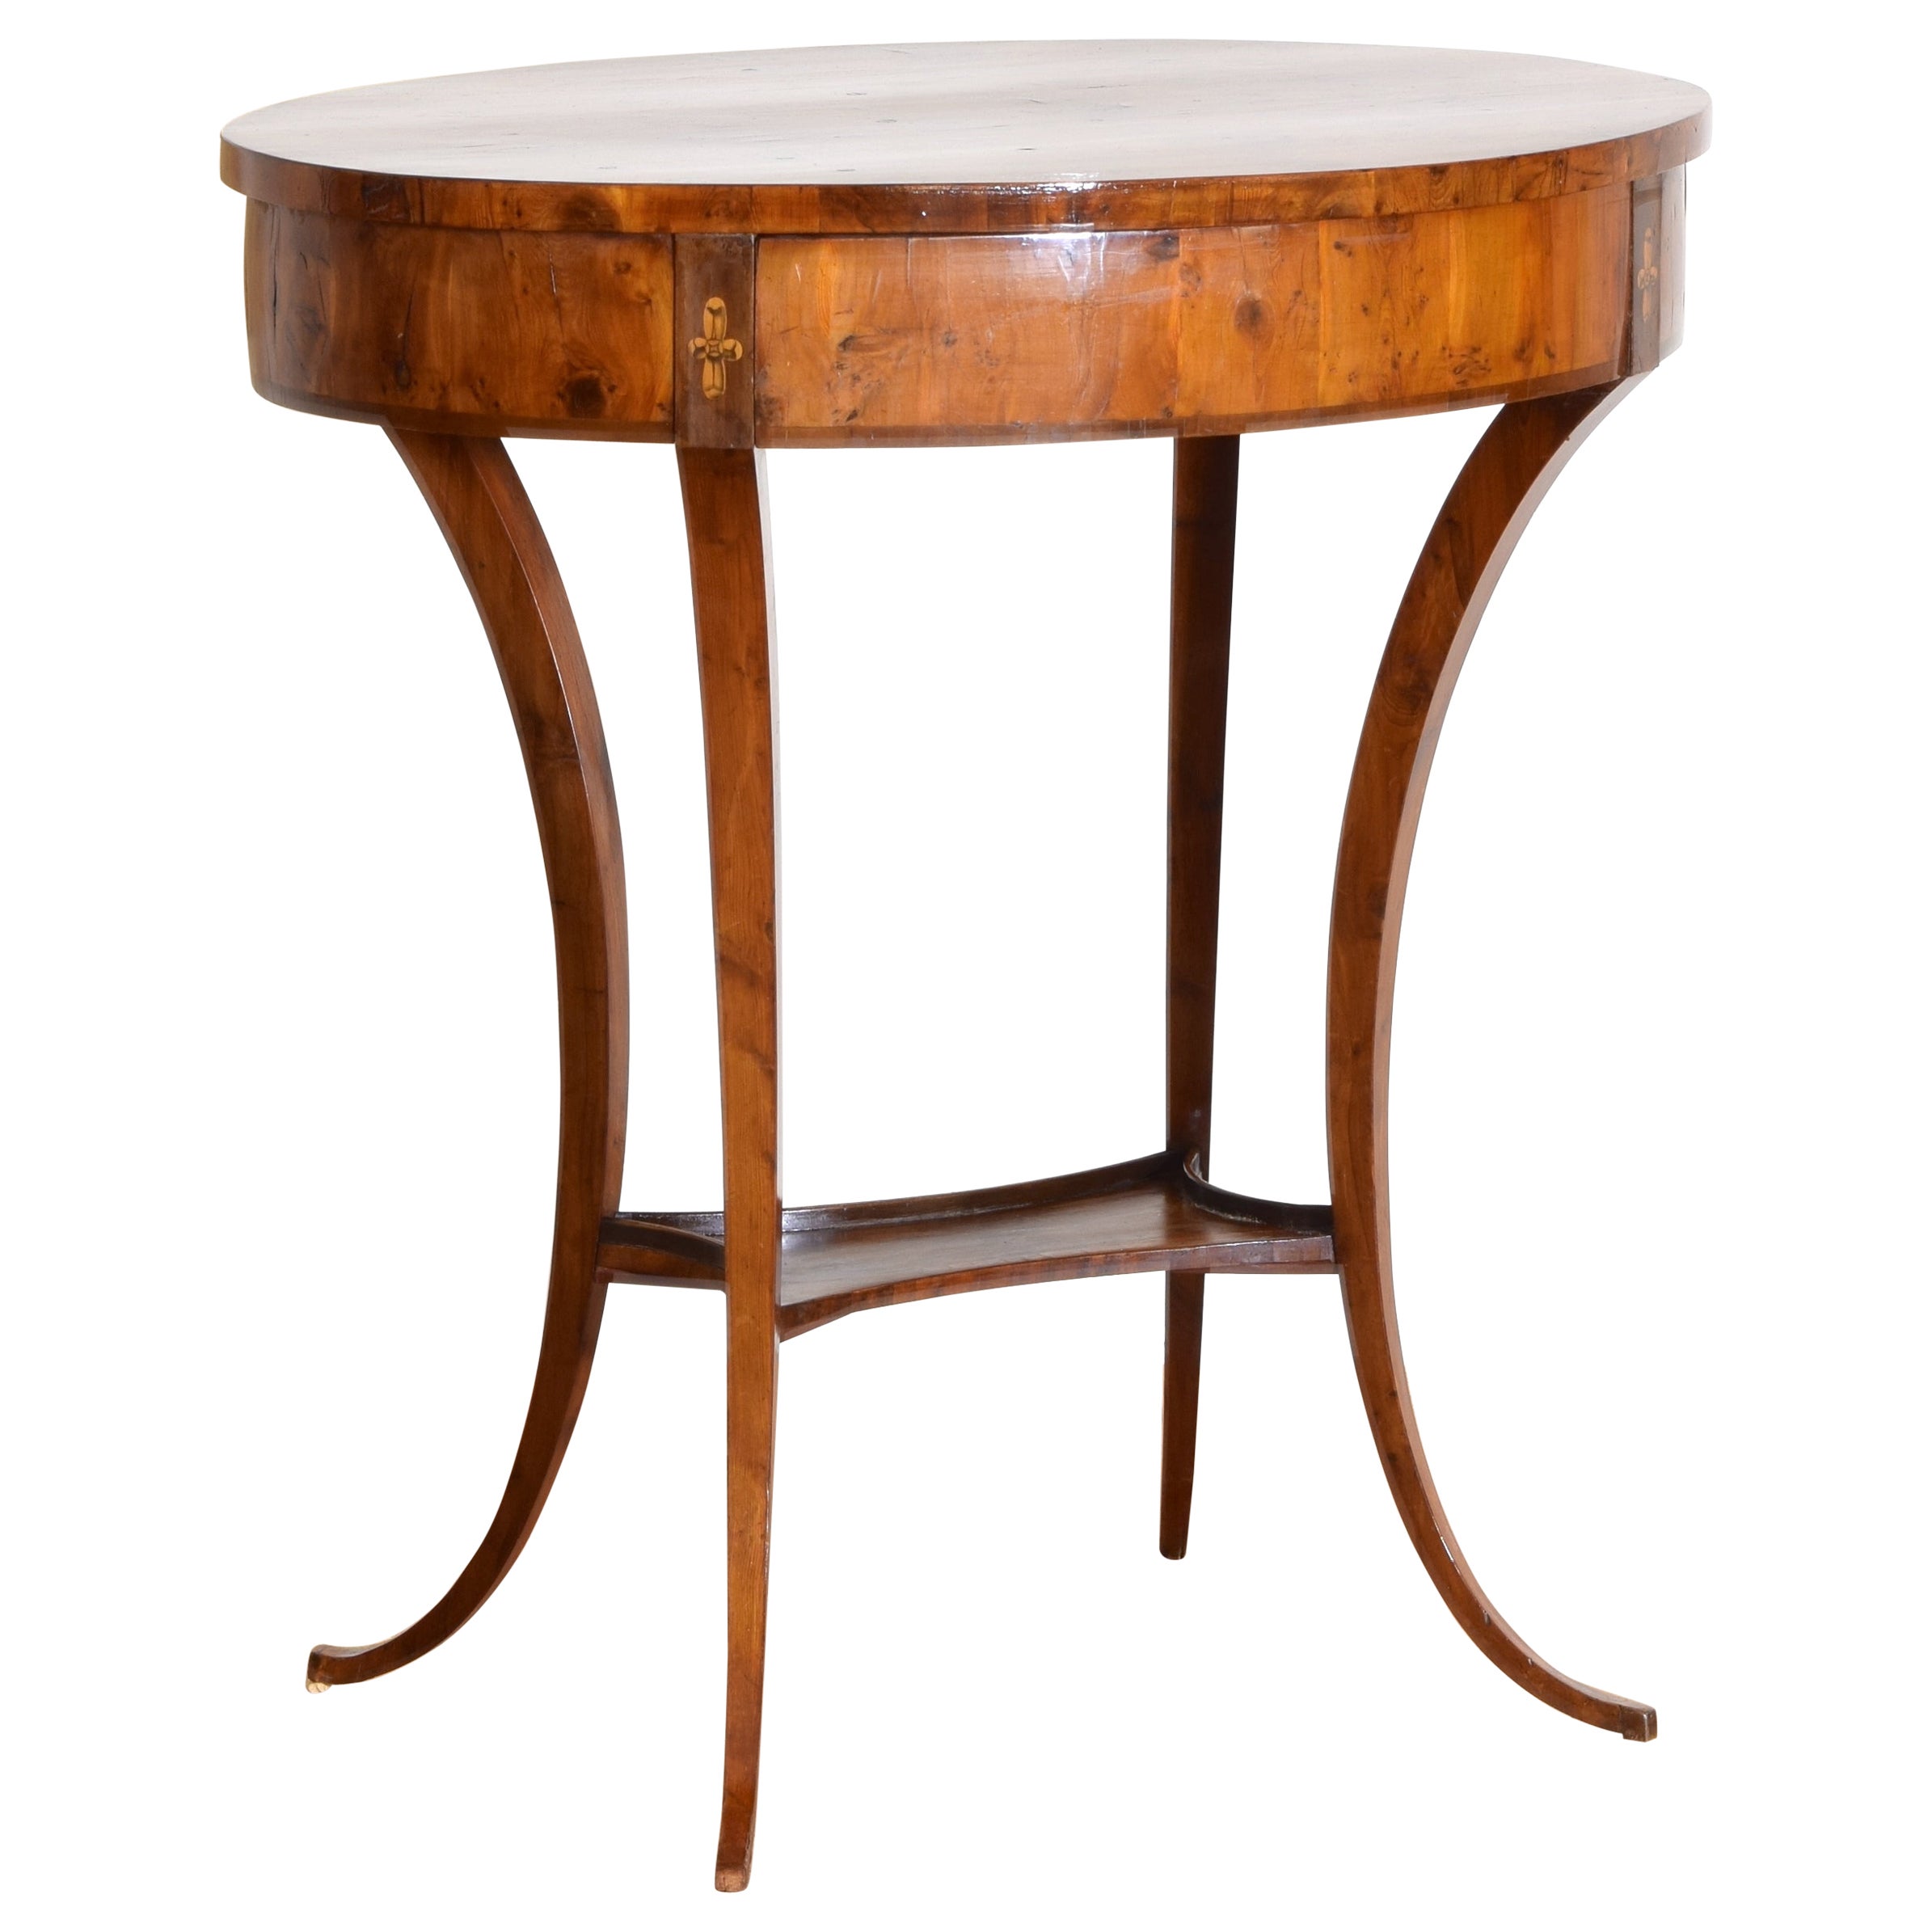 Austrian Late Neoclassic Shaped Burl Walnut Oval 1-Drawer Side Table, circa 1830 For Sale